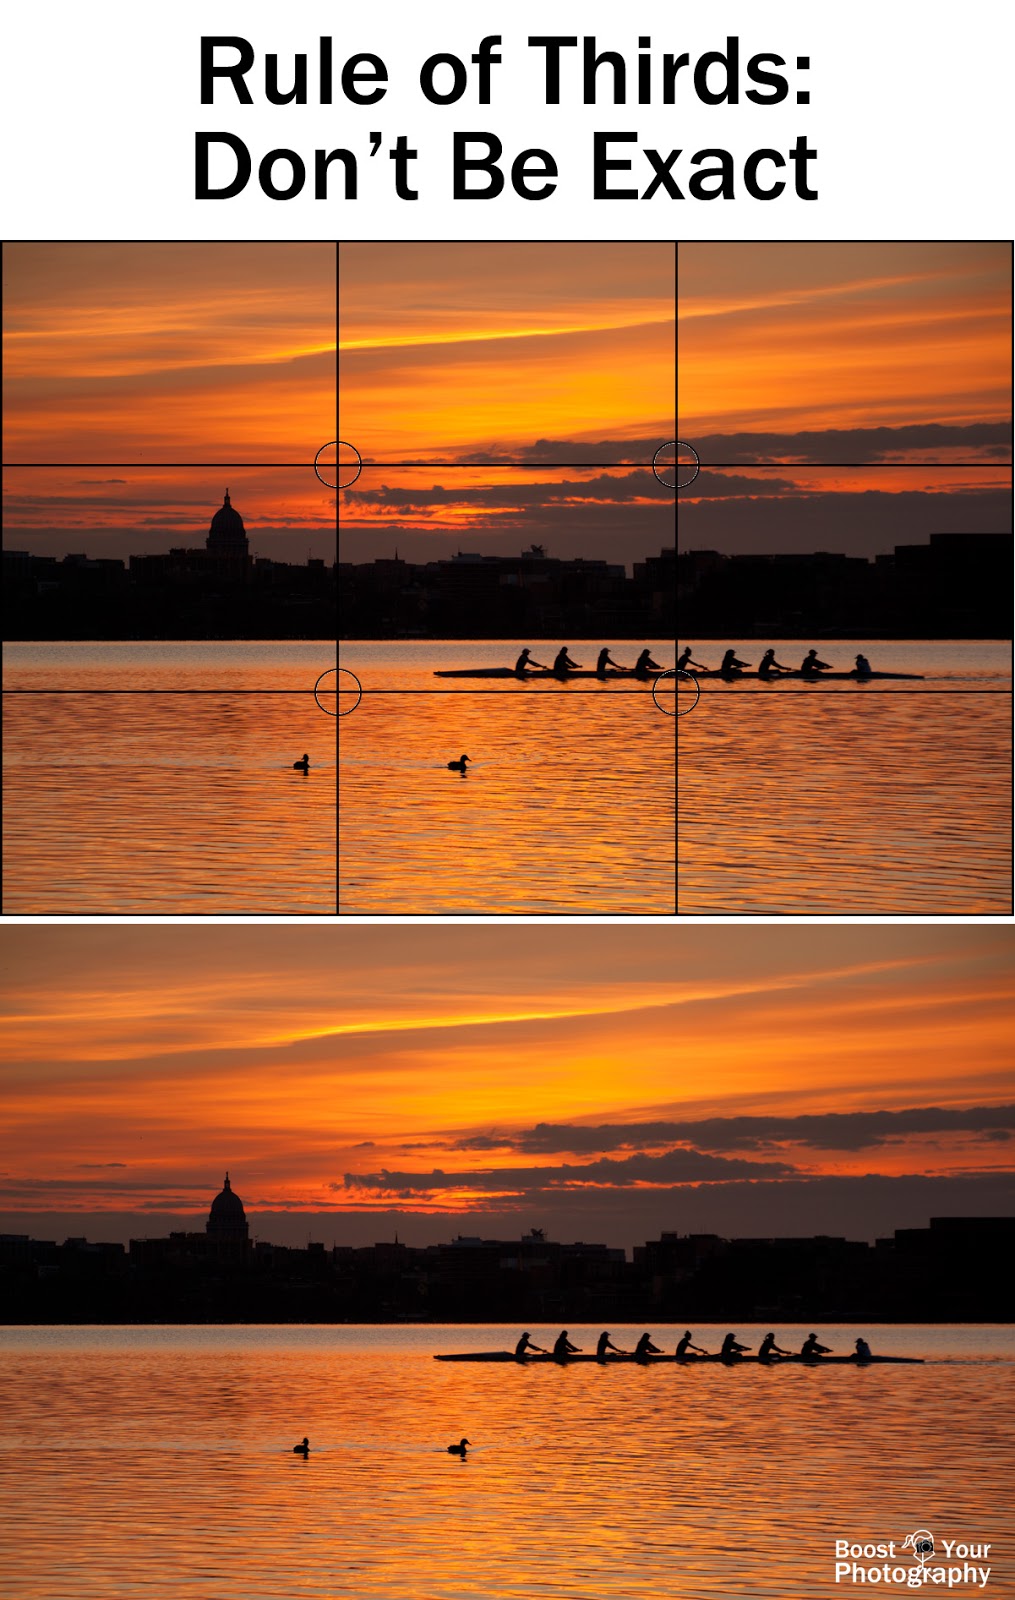 The Rule of Thirds - don't be exact | Boost Your Photography